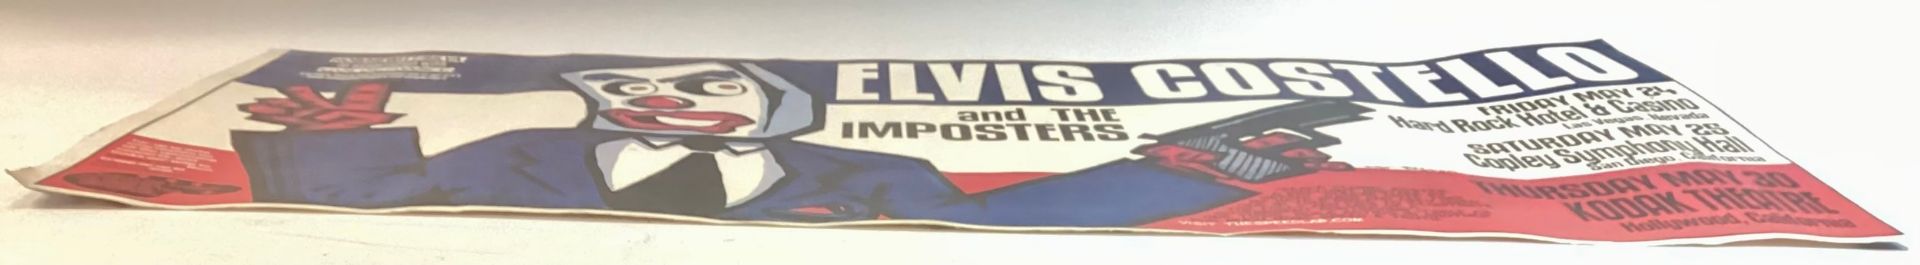 ELVIS COSTELLO AND THE IMPOSTERS SILKSCREEN POSTER. SPEED. This silkscreen poster is from their - Image 2 of 3